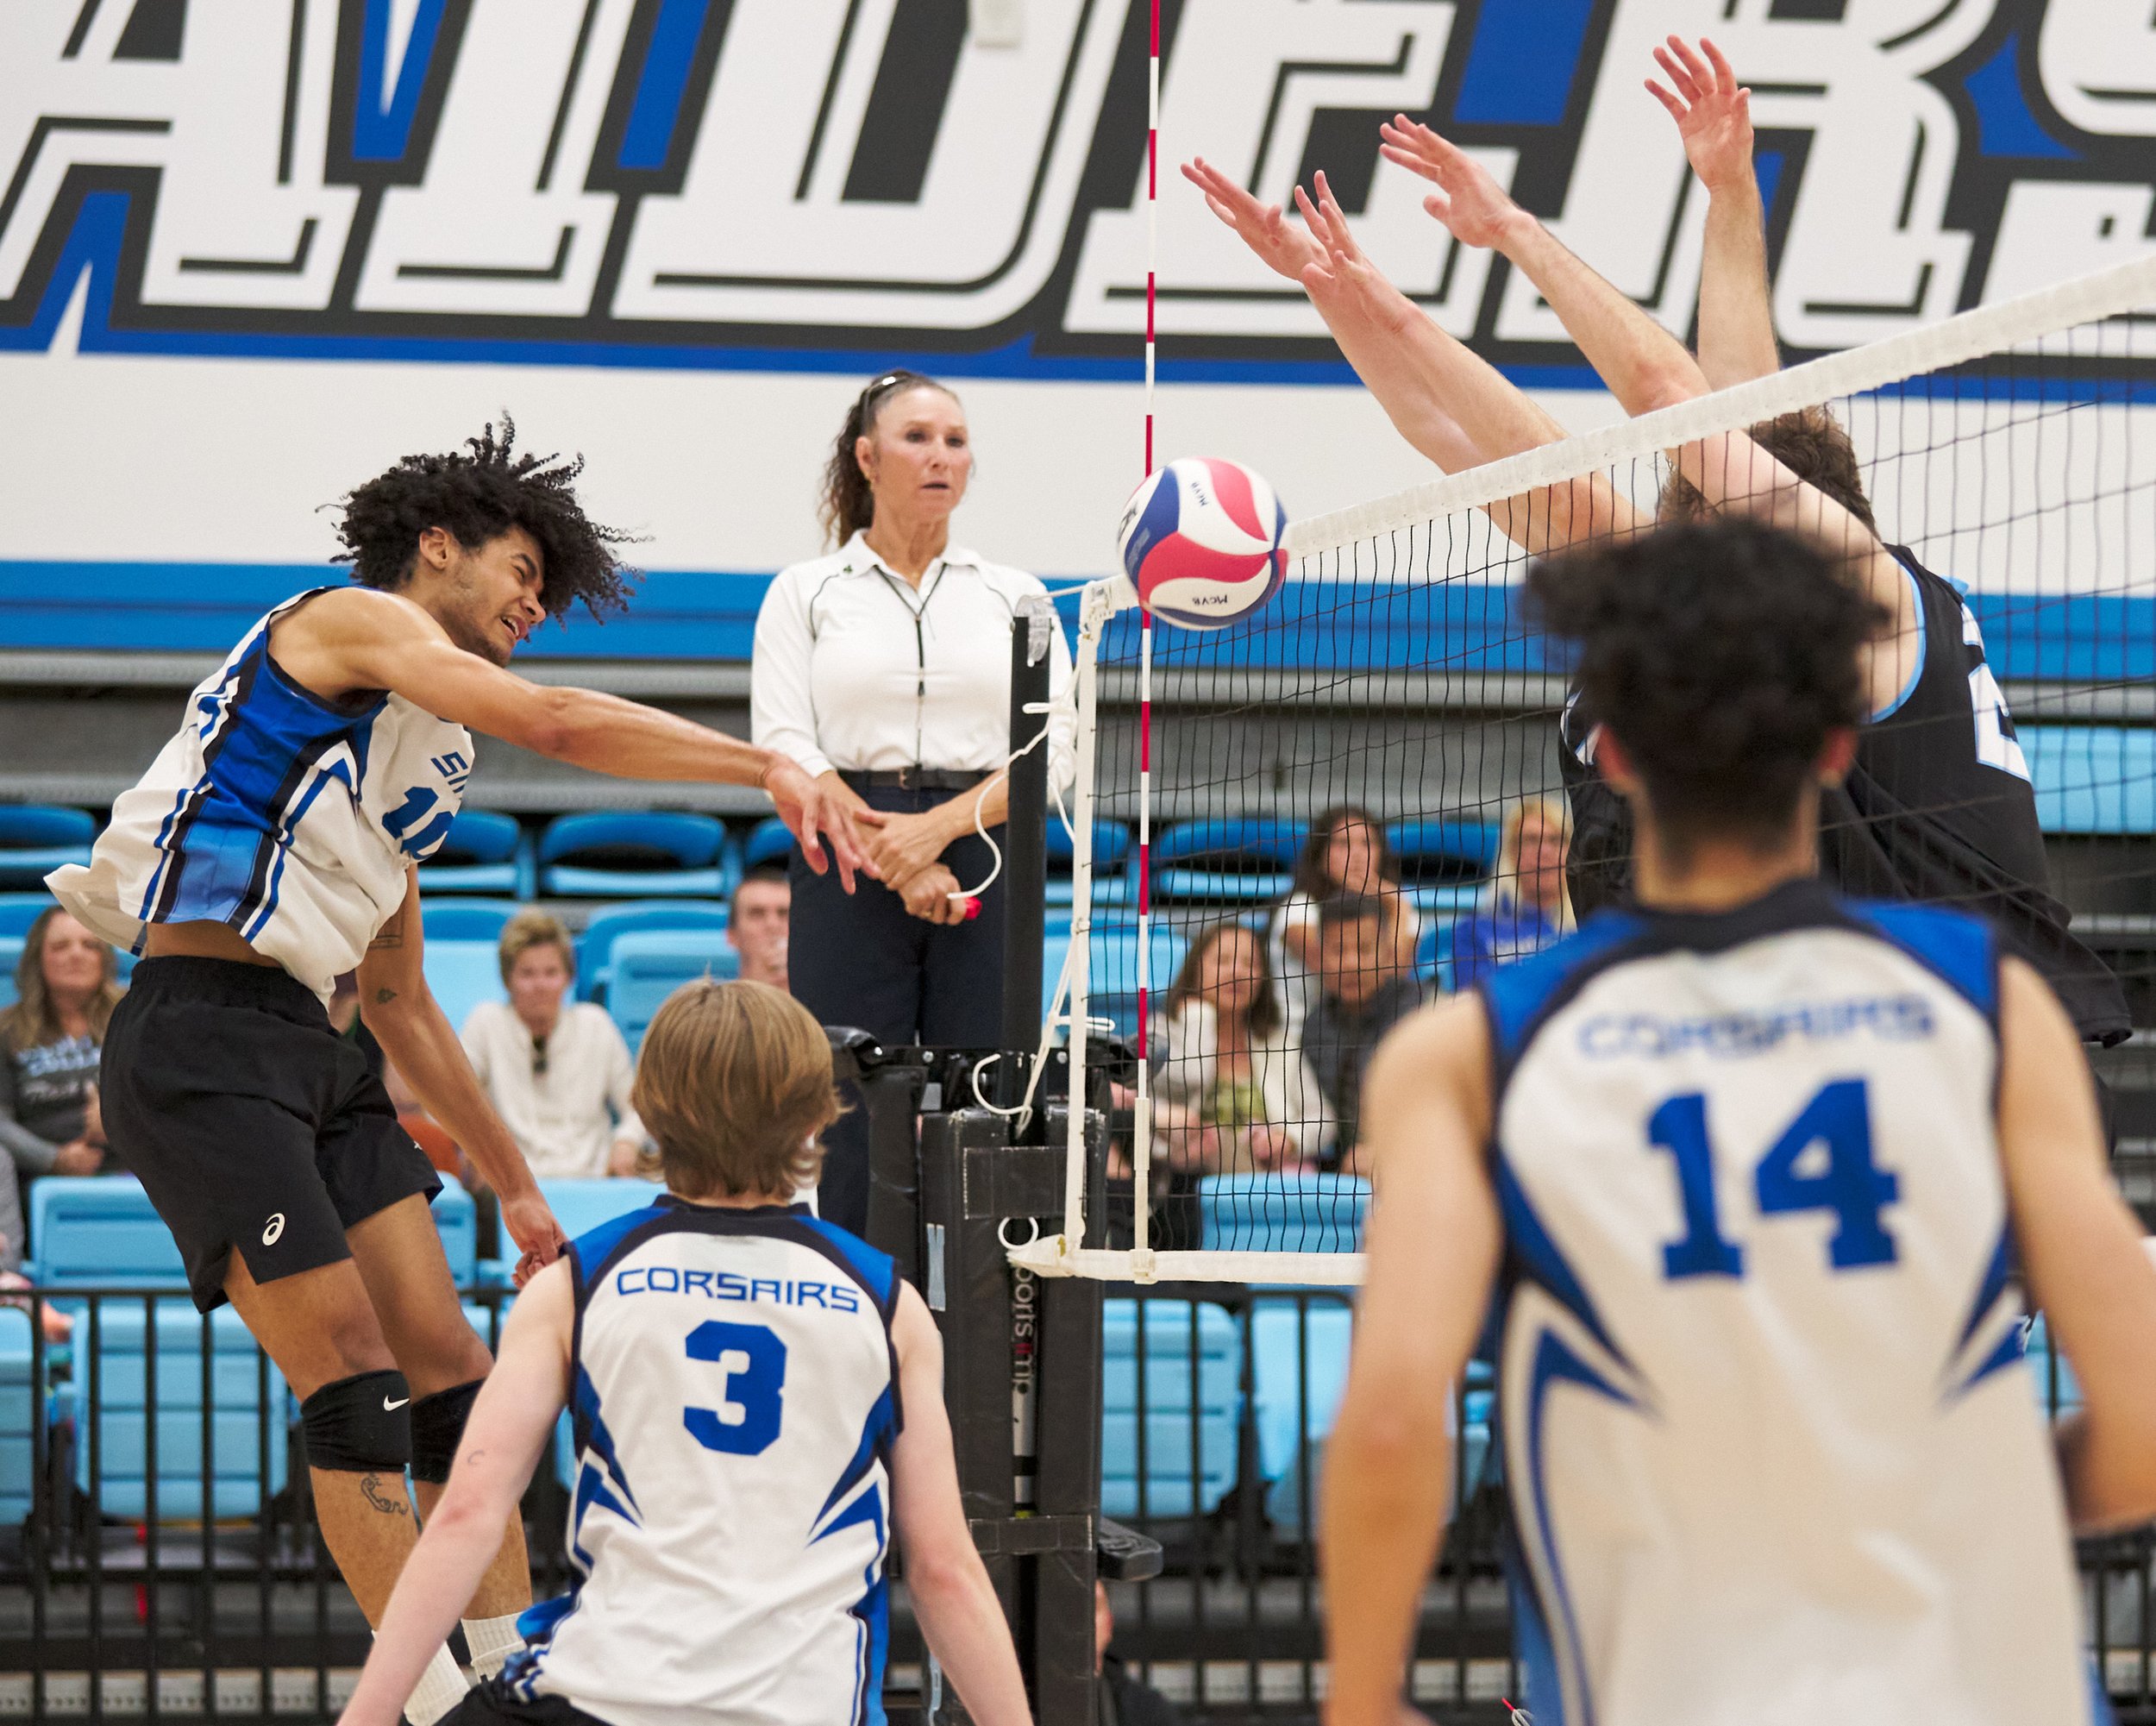  Santa Monica College Corsairs' Nate Davis hits the ball into the net during the men's volleyball match against the Moorpark College Raiders on Friday, March 17, 2023, at Moorpark College's Gymnasium in Moorpark, Calif. The Corsairs lost 3-1. (Nichol